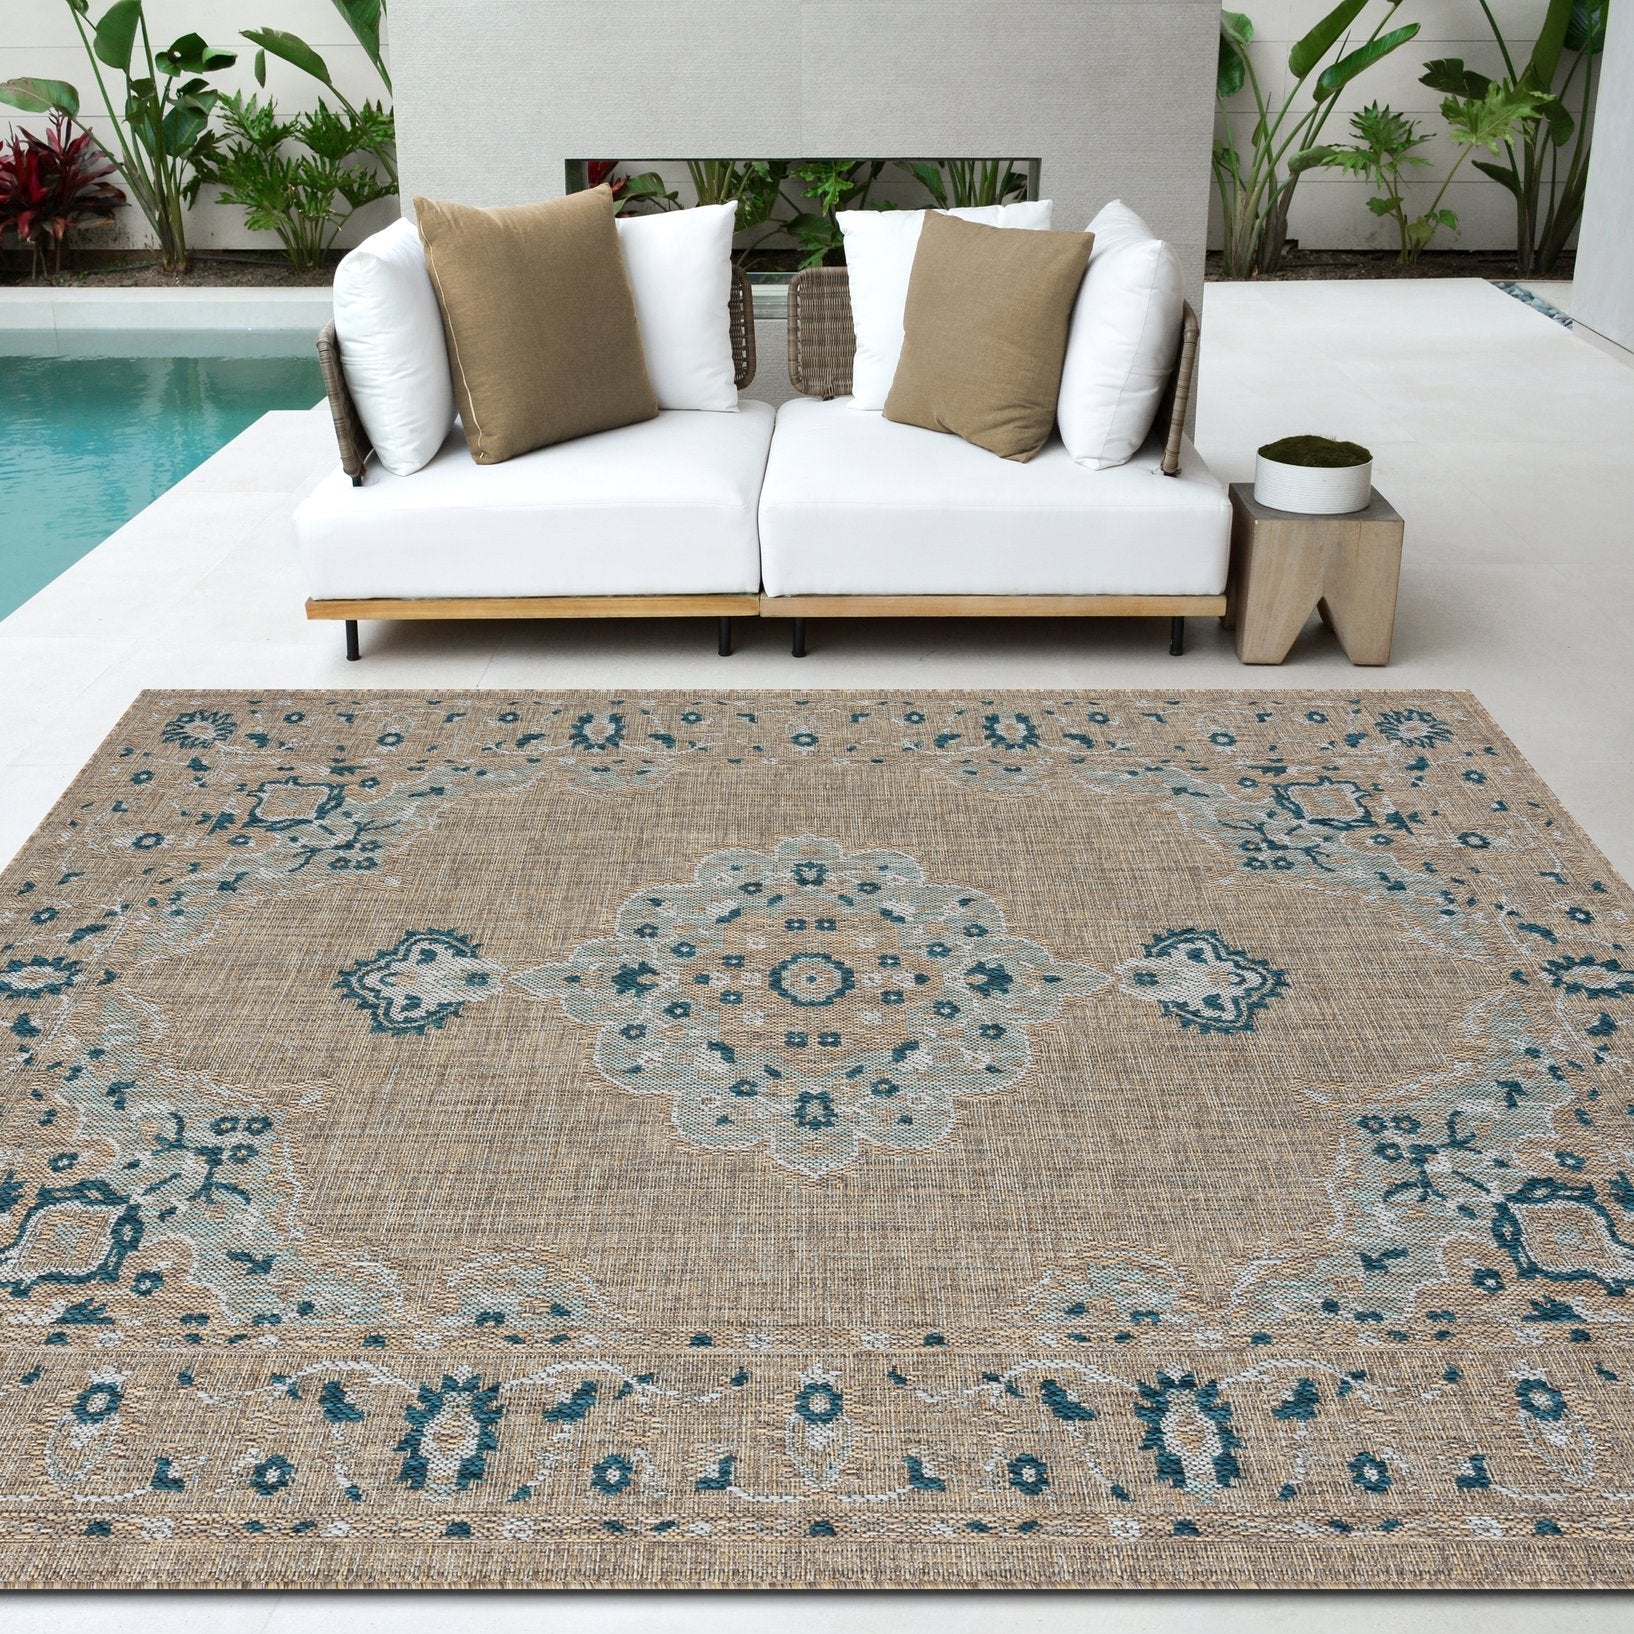 HR Waterproof Bohemian Traditional Design Outdoor Rug: Stain/Fade-Resistant #1672